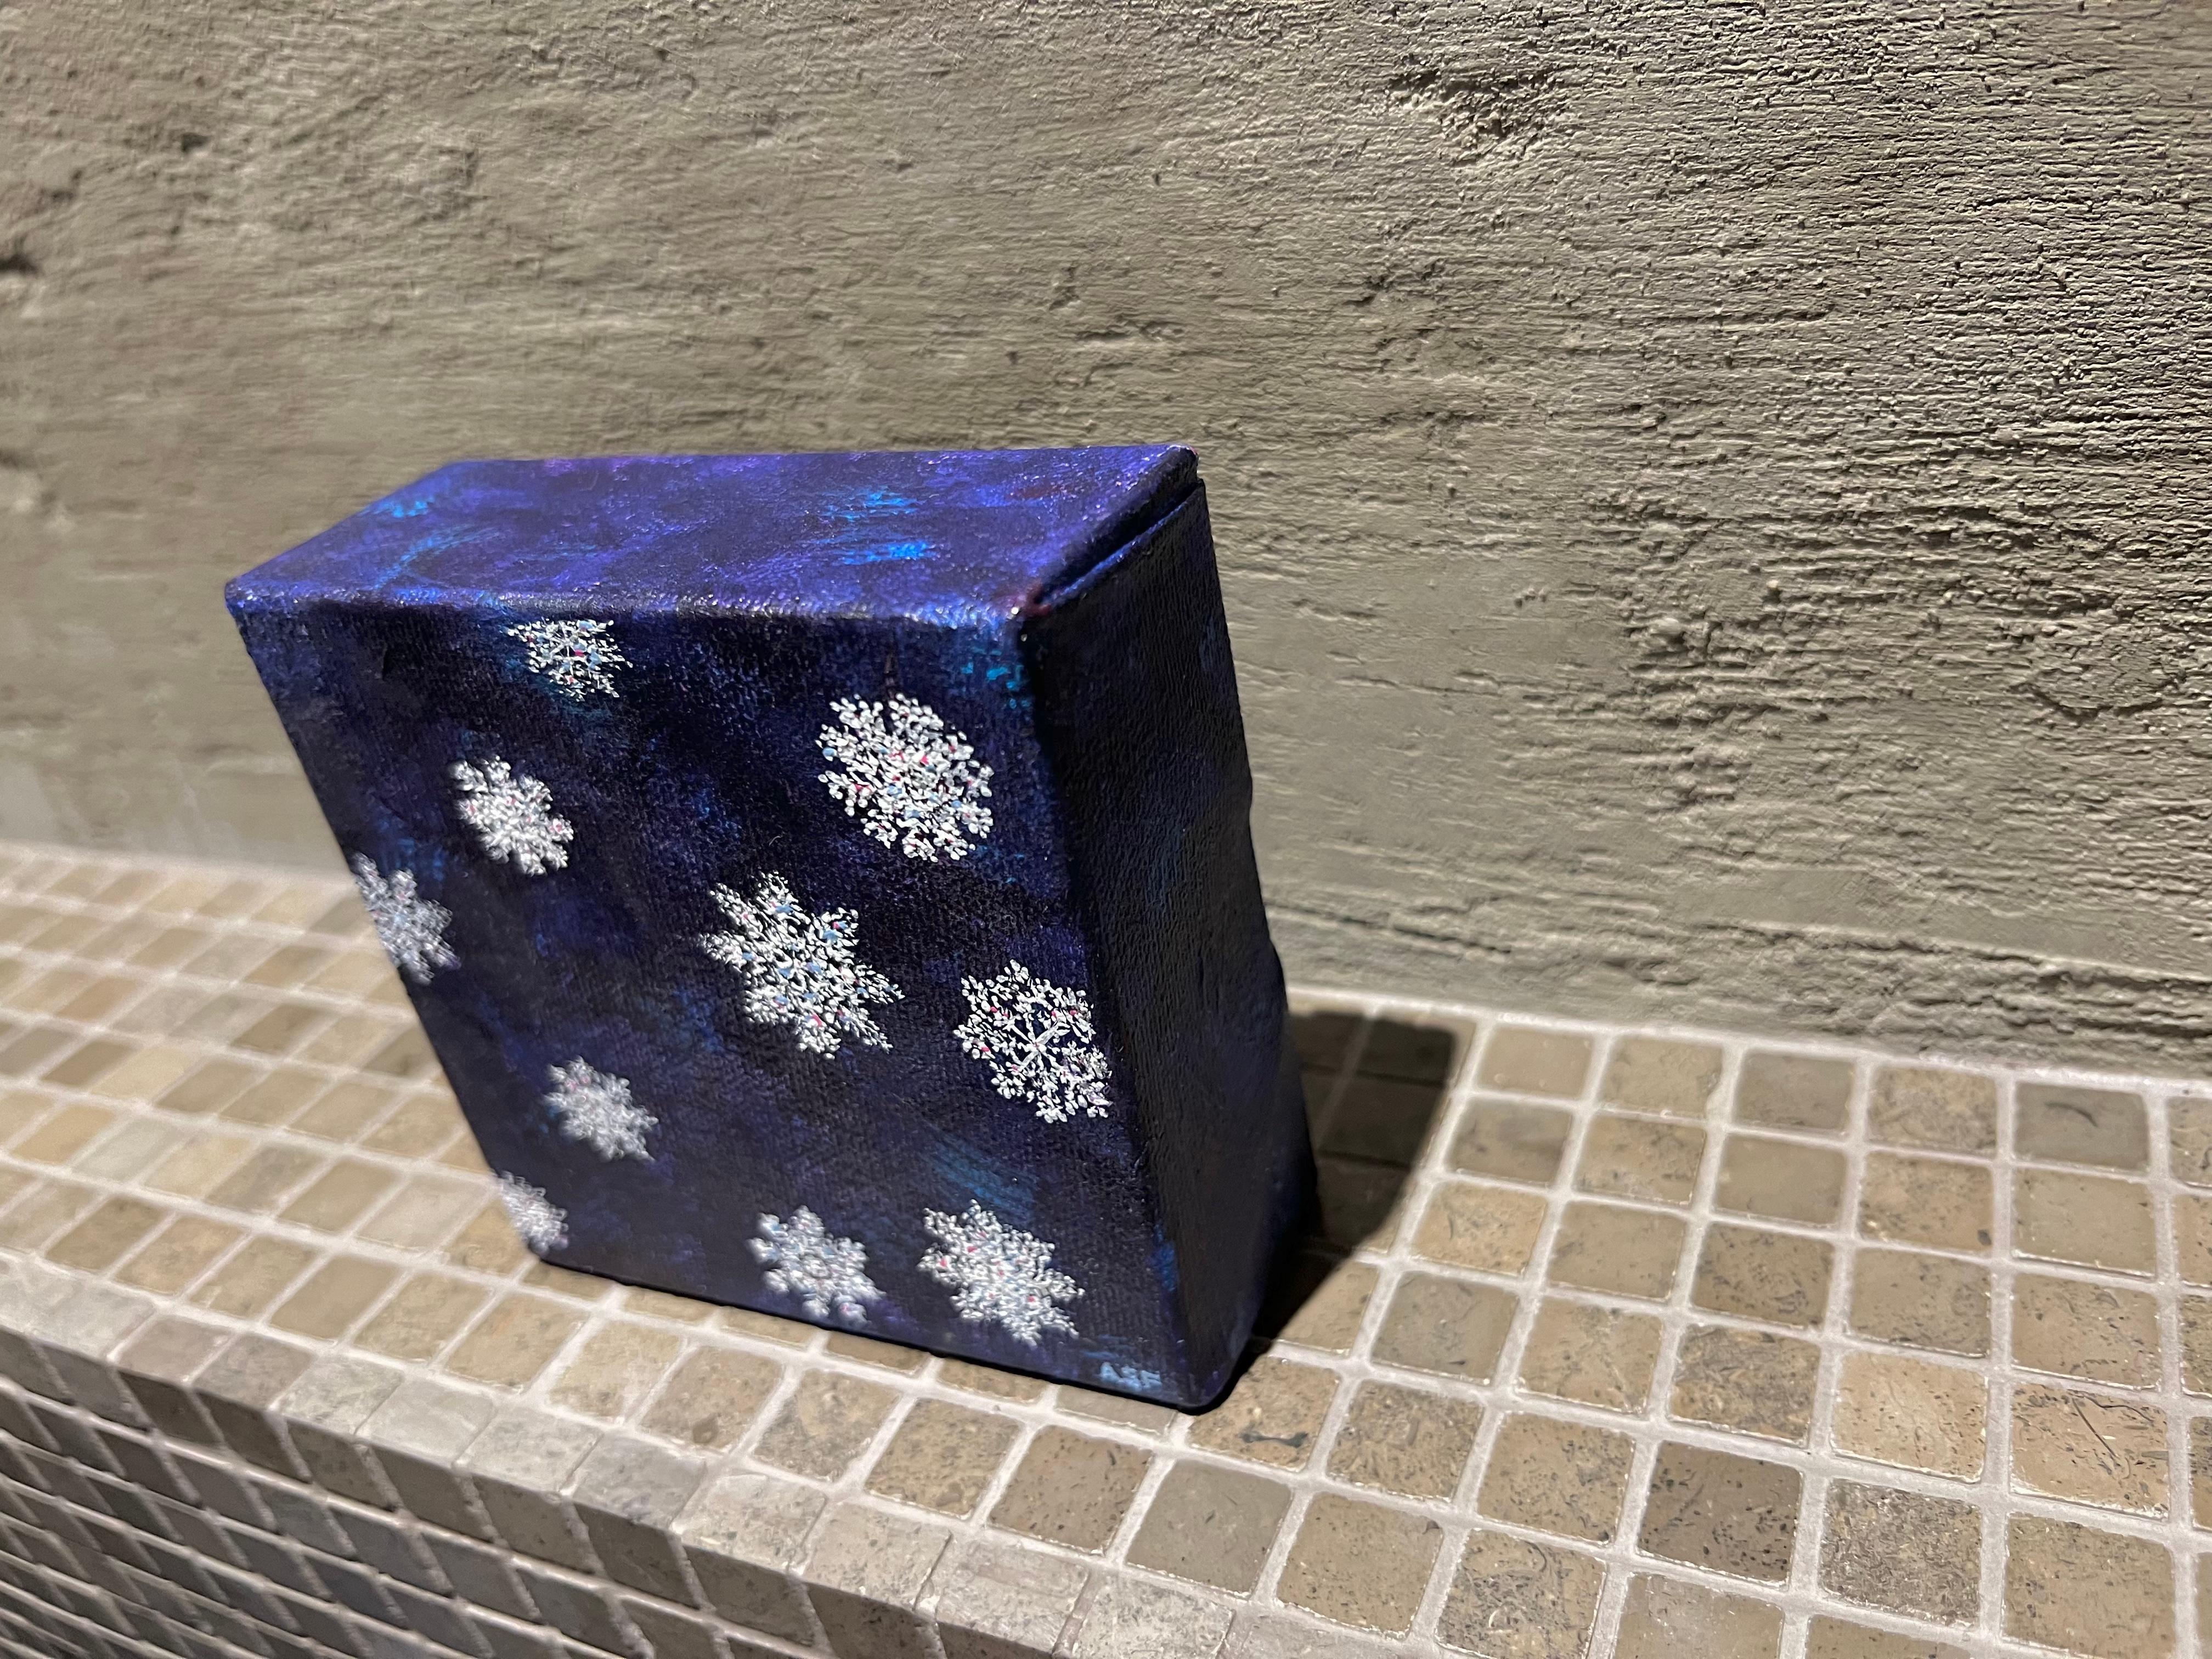 So little with so much to say. Discover the charm of this petite painting that speaks volumes. Intricate snowflakes glisten softly against a serene winter night sky. It's beauty lies in the highly delicate details within each unique snowflake. Using